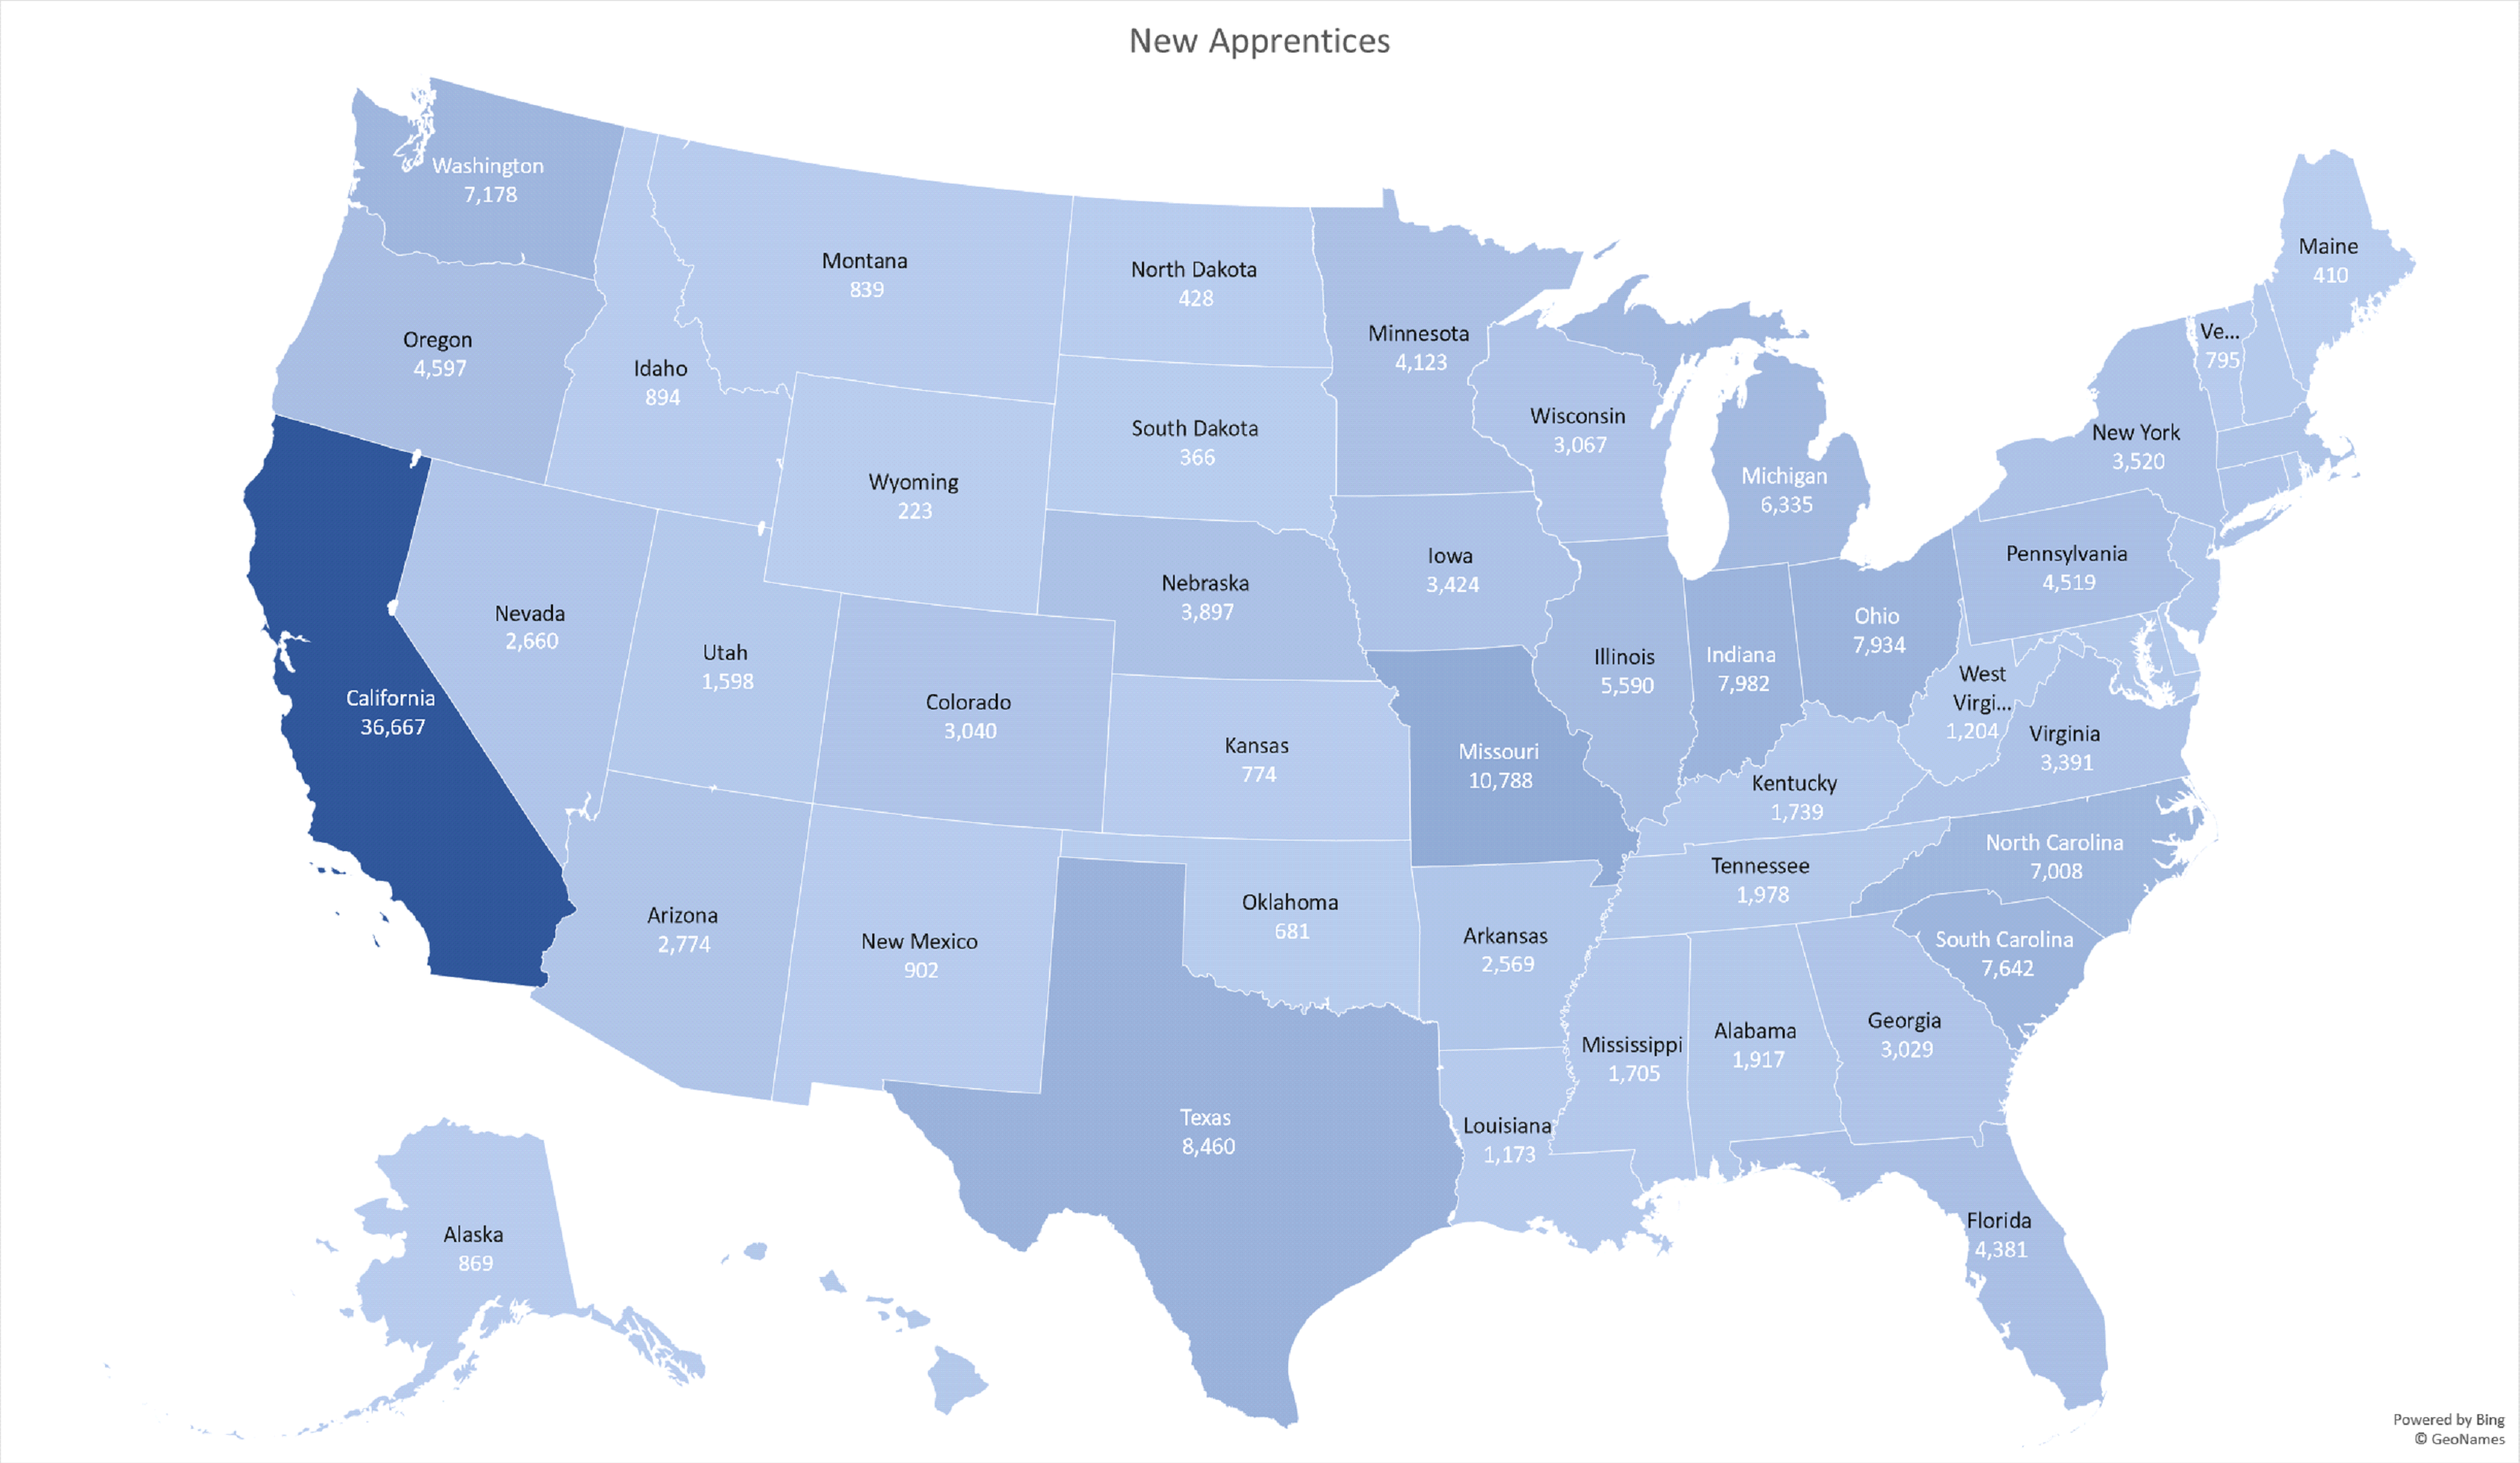 Image of New Apprenticeship 2019 State Map